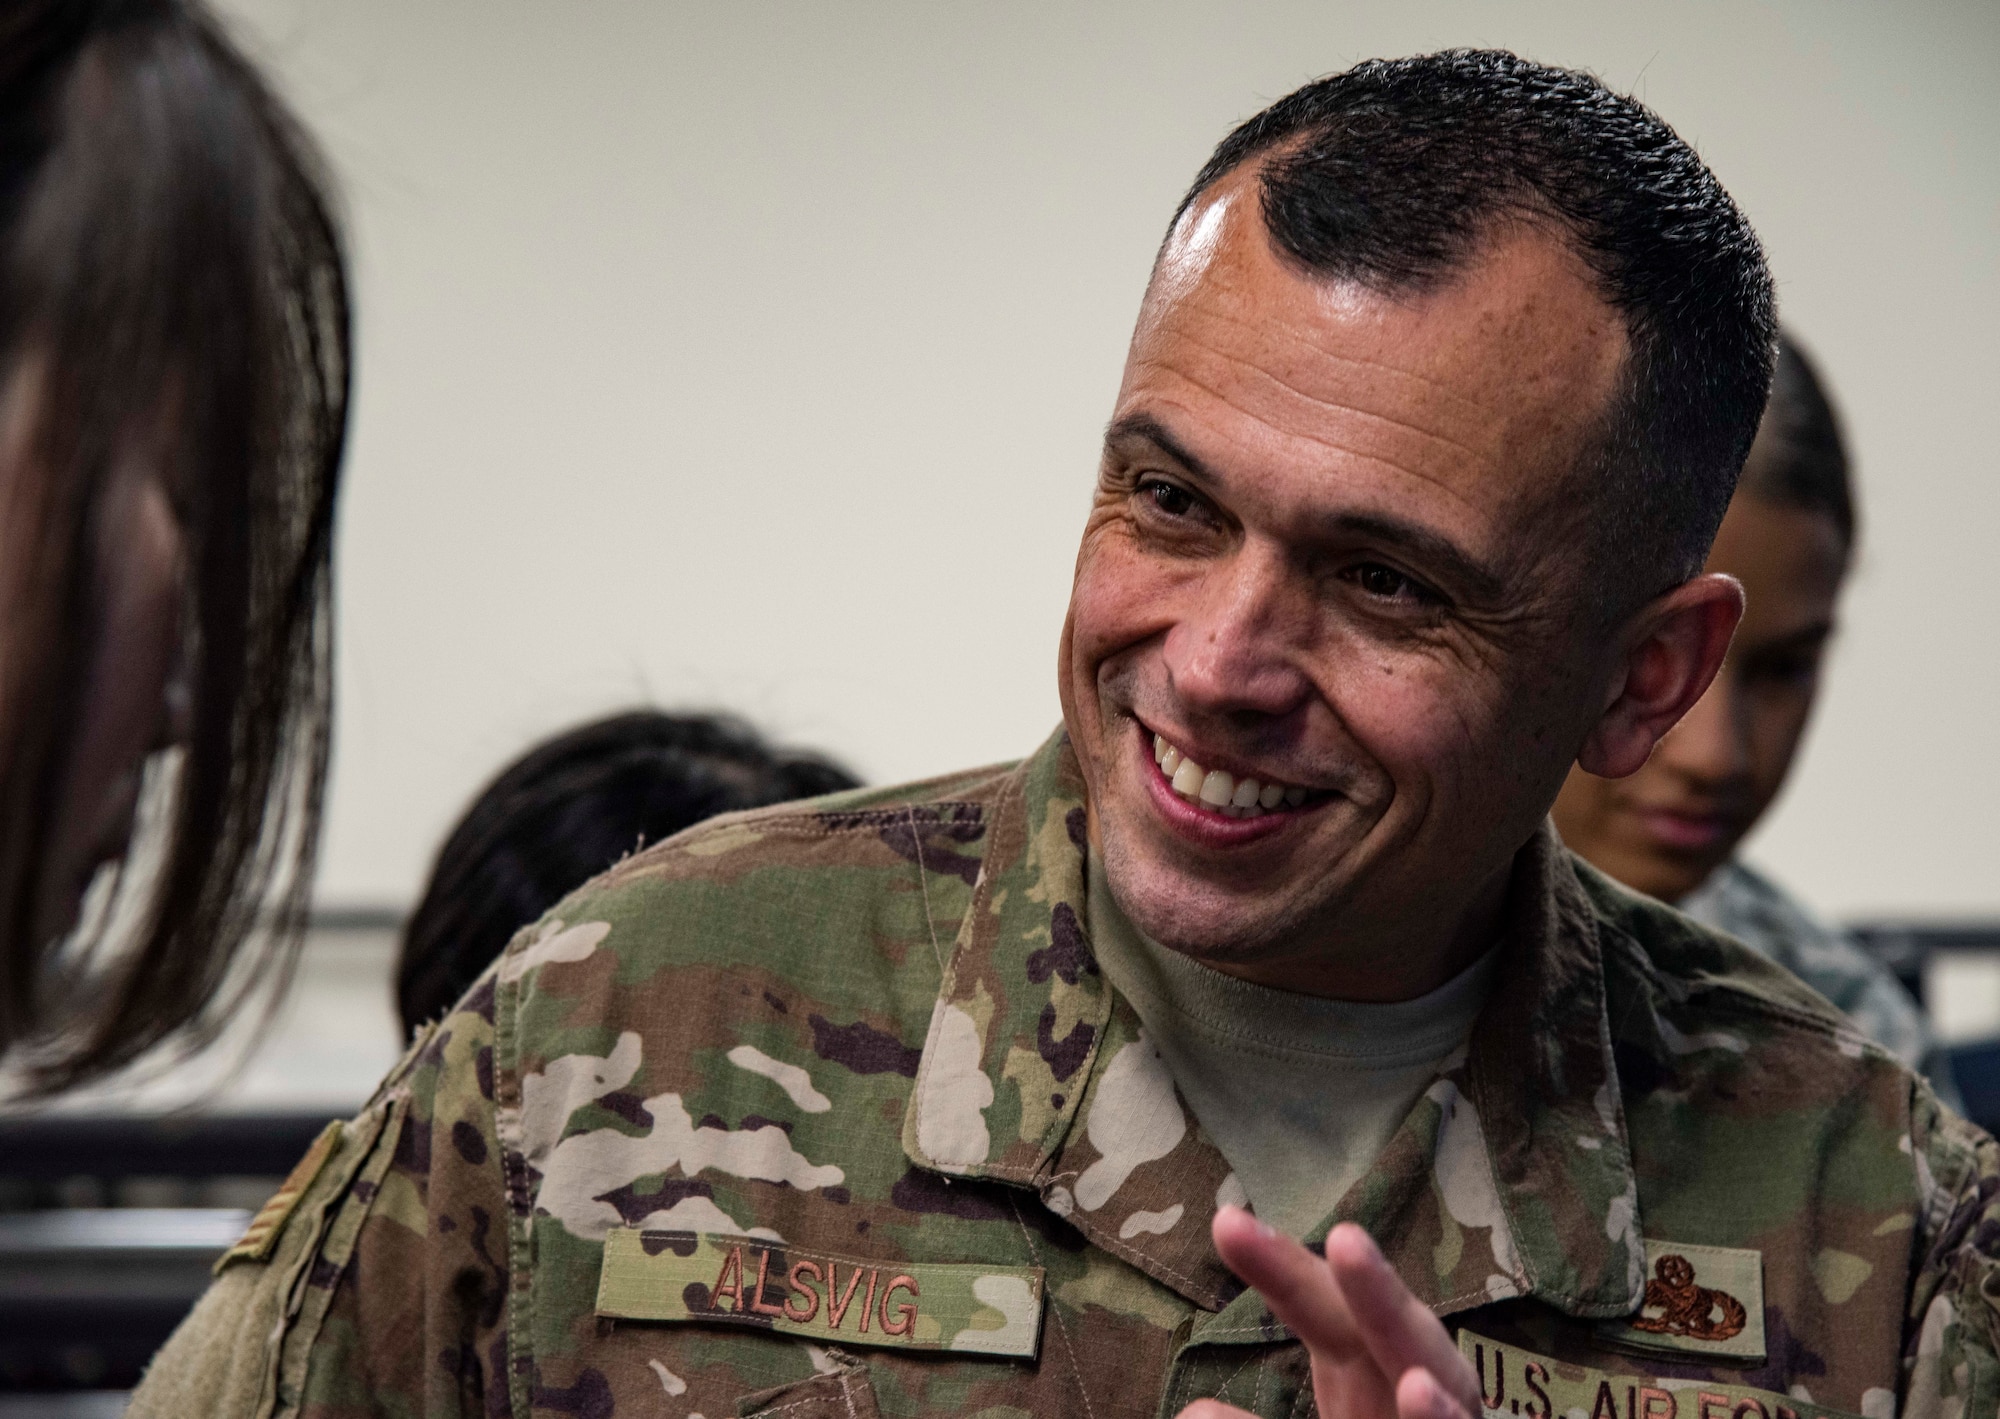 U.S. Air Force Chief Master Sgt. John Alsvig, the 35th Fighter Wing command chief, speaks with a Japan Air Self-Defense Force 37th Surveillance Squadron member during a bilateral exchange program at Yamada Sub Base, Yamada Town, Japan, Oct. 17, 2018. Alsvig fellowshipped and familiarized himself with the 37th SS’s leadership, strengthening U.S. and Japan bonds. (U.S. Air Force photo by Senior Airman Sadie Colbert)